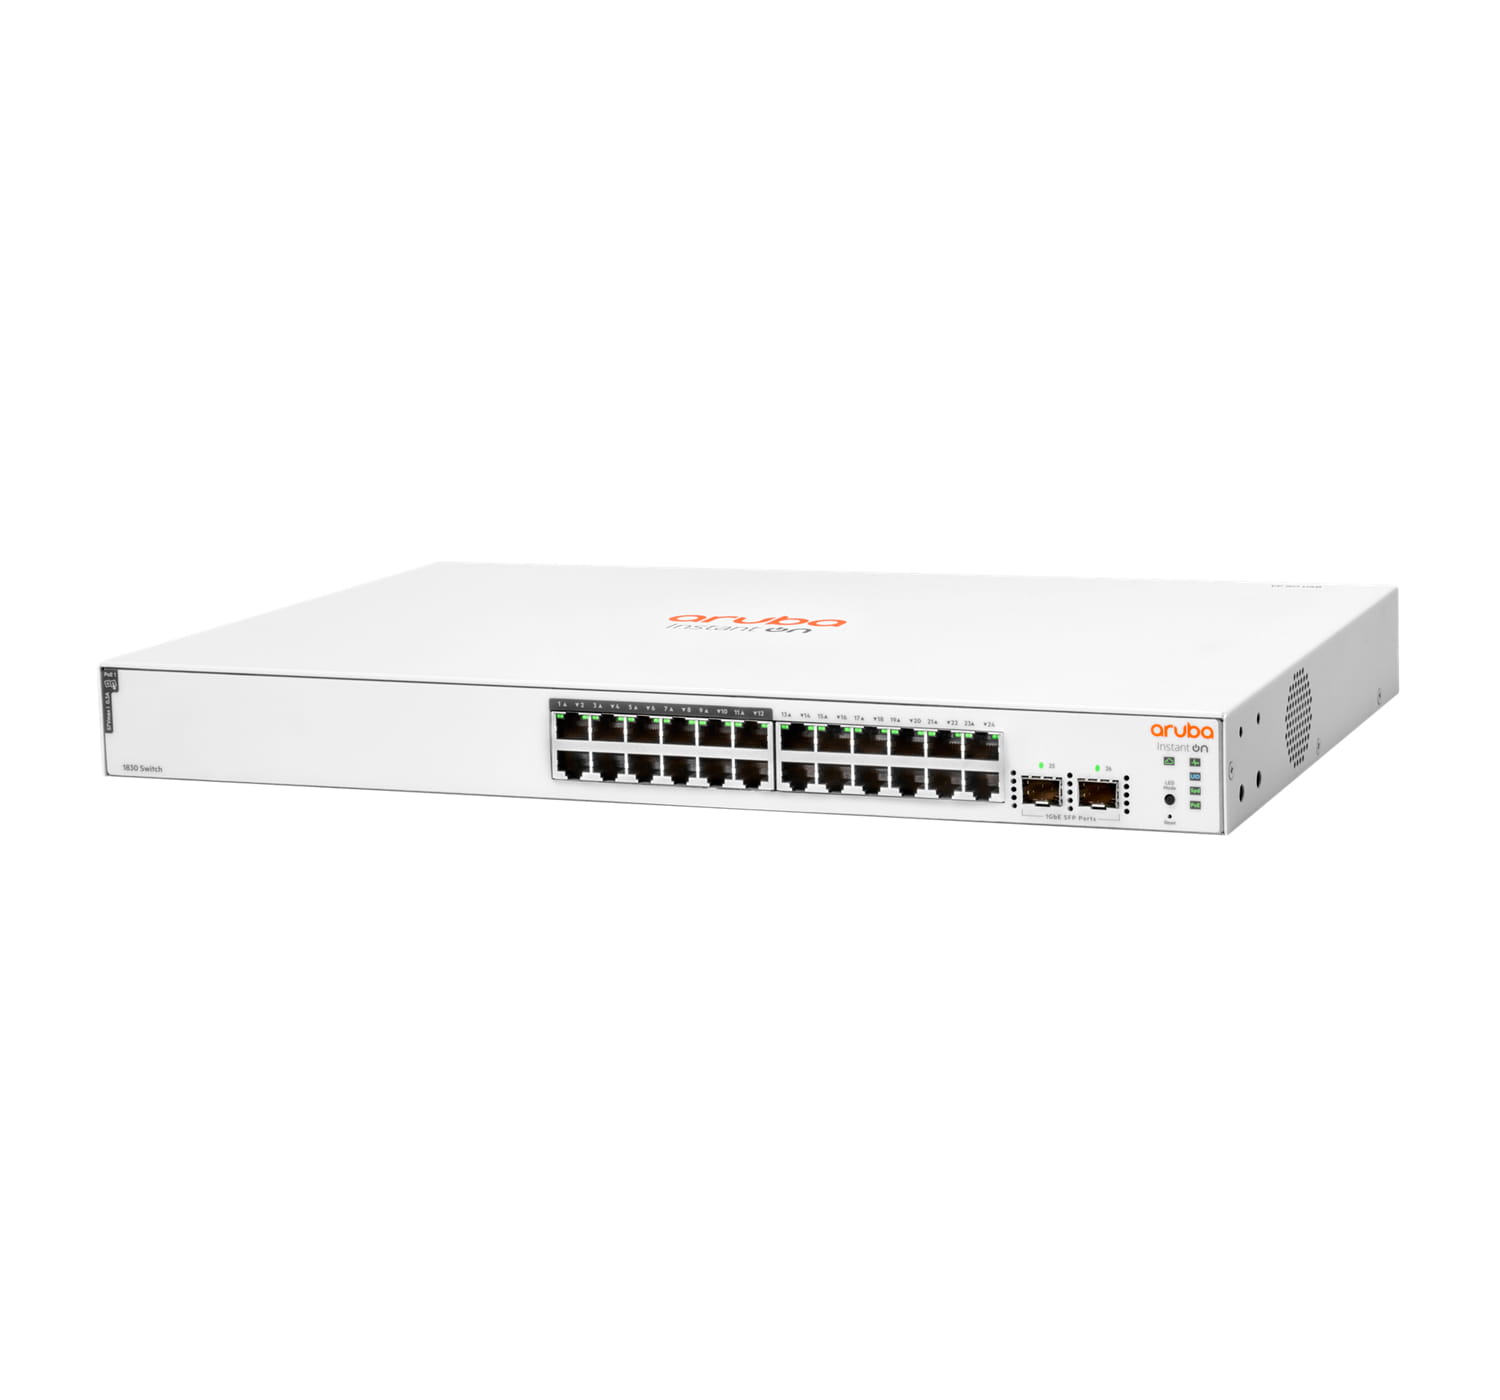 HPE Networking Instant On 1830 24G 12p Class4 PoE 2SFP 195W Switch - Switch - Smart - 12 x 10/100/1000 + 12 x 10/100/1000 (PoE+) - managed